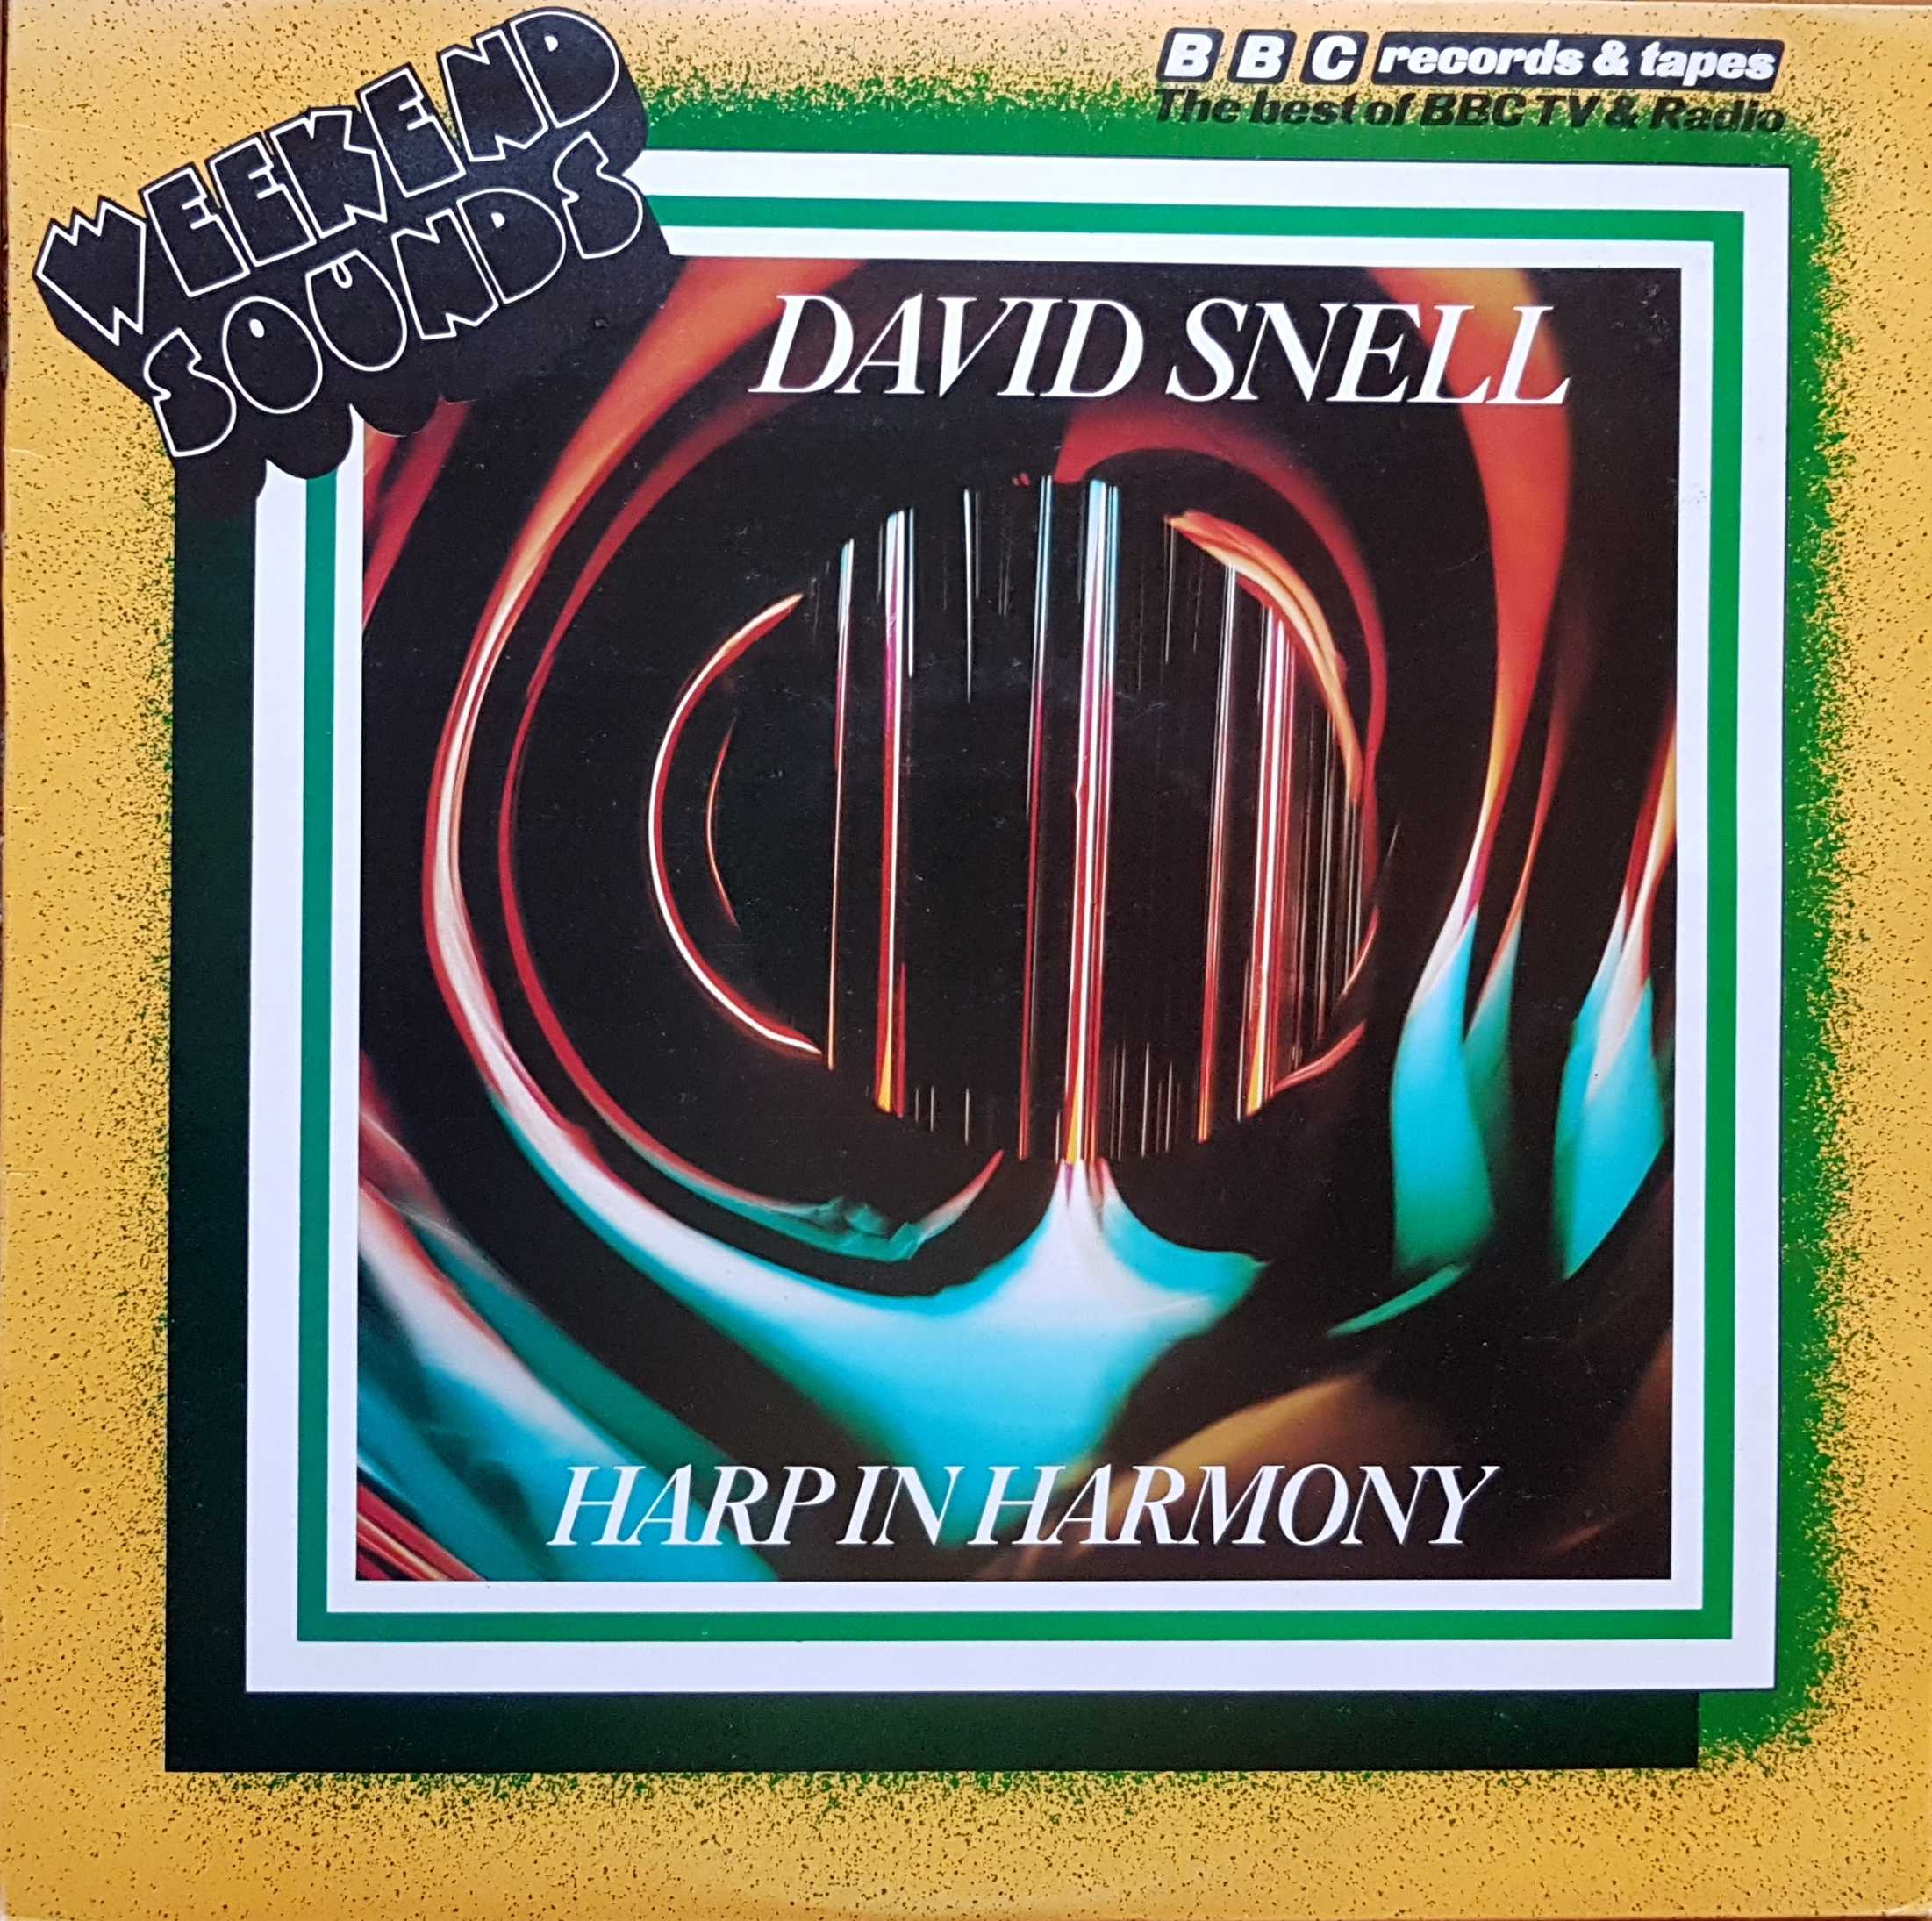 Picture of REC 311 Harp in harmony by artist David Snell from the BBC albums - Records and Tapes library